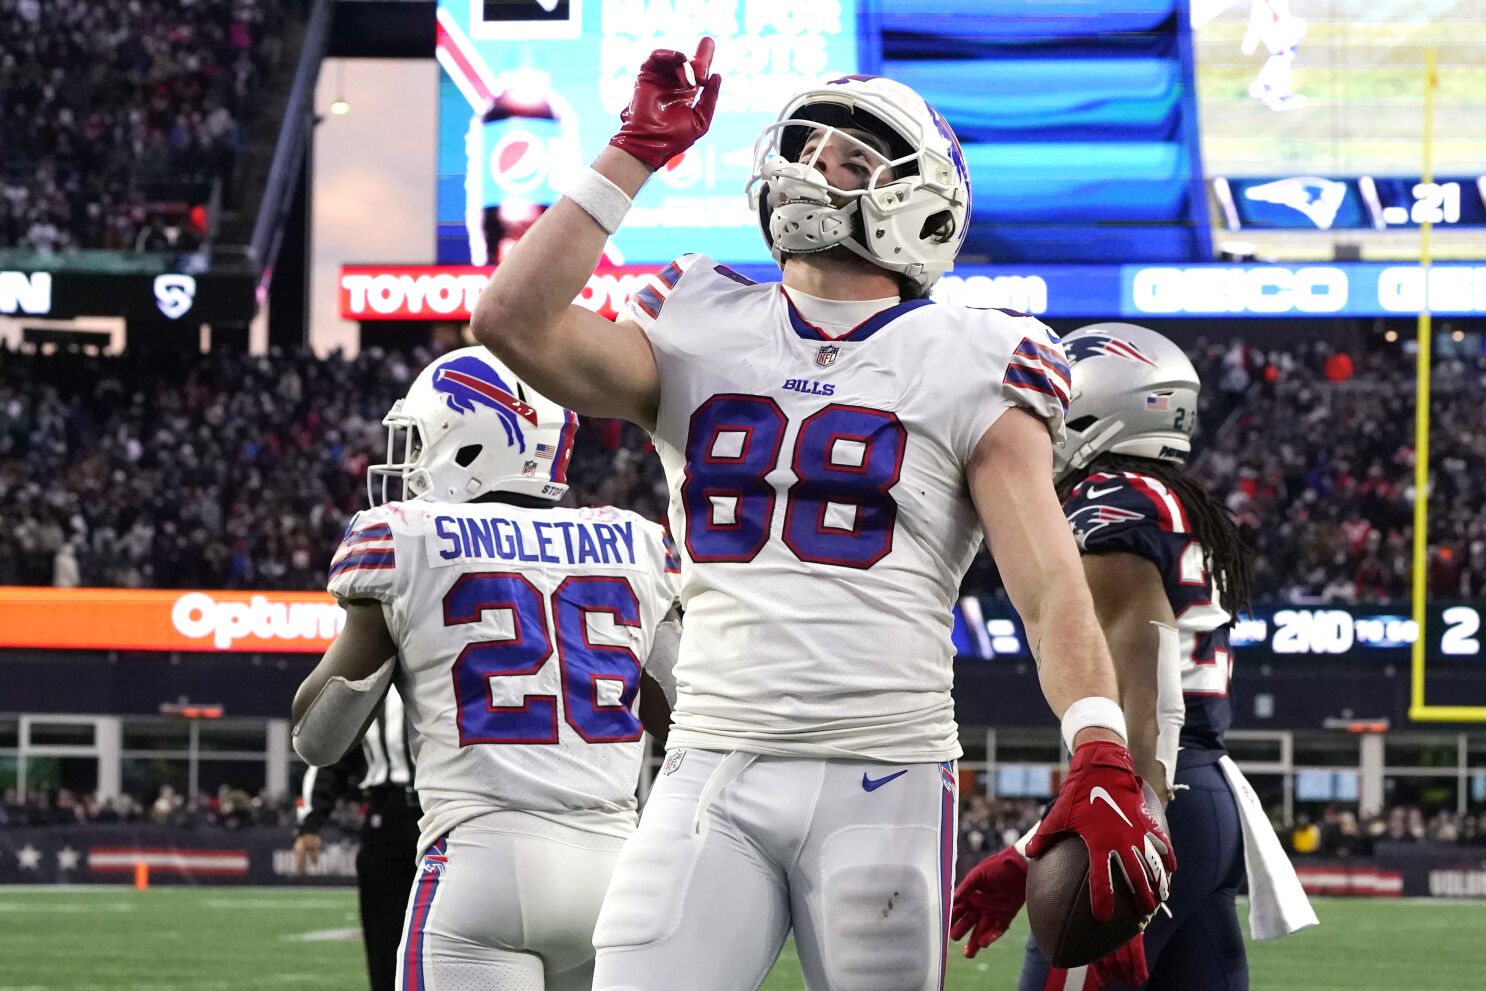 Bills clinch third consecutive playoff berth with win over Falcons